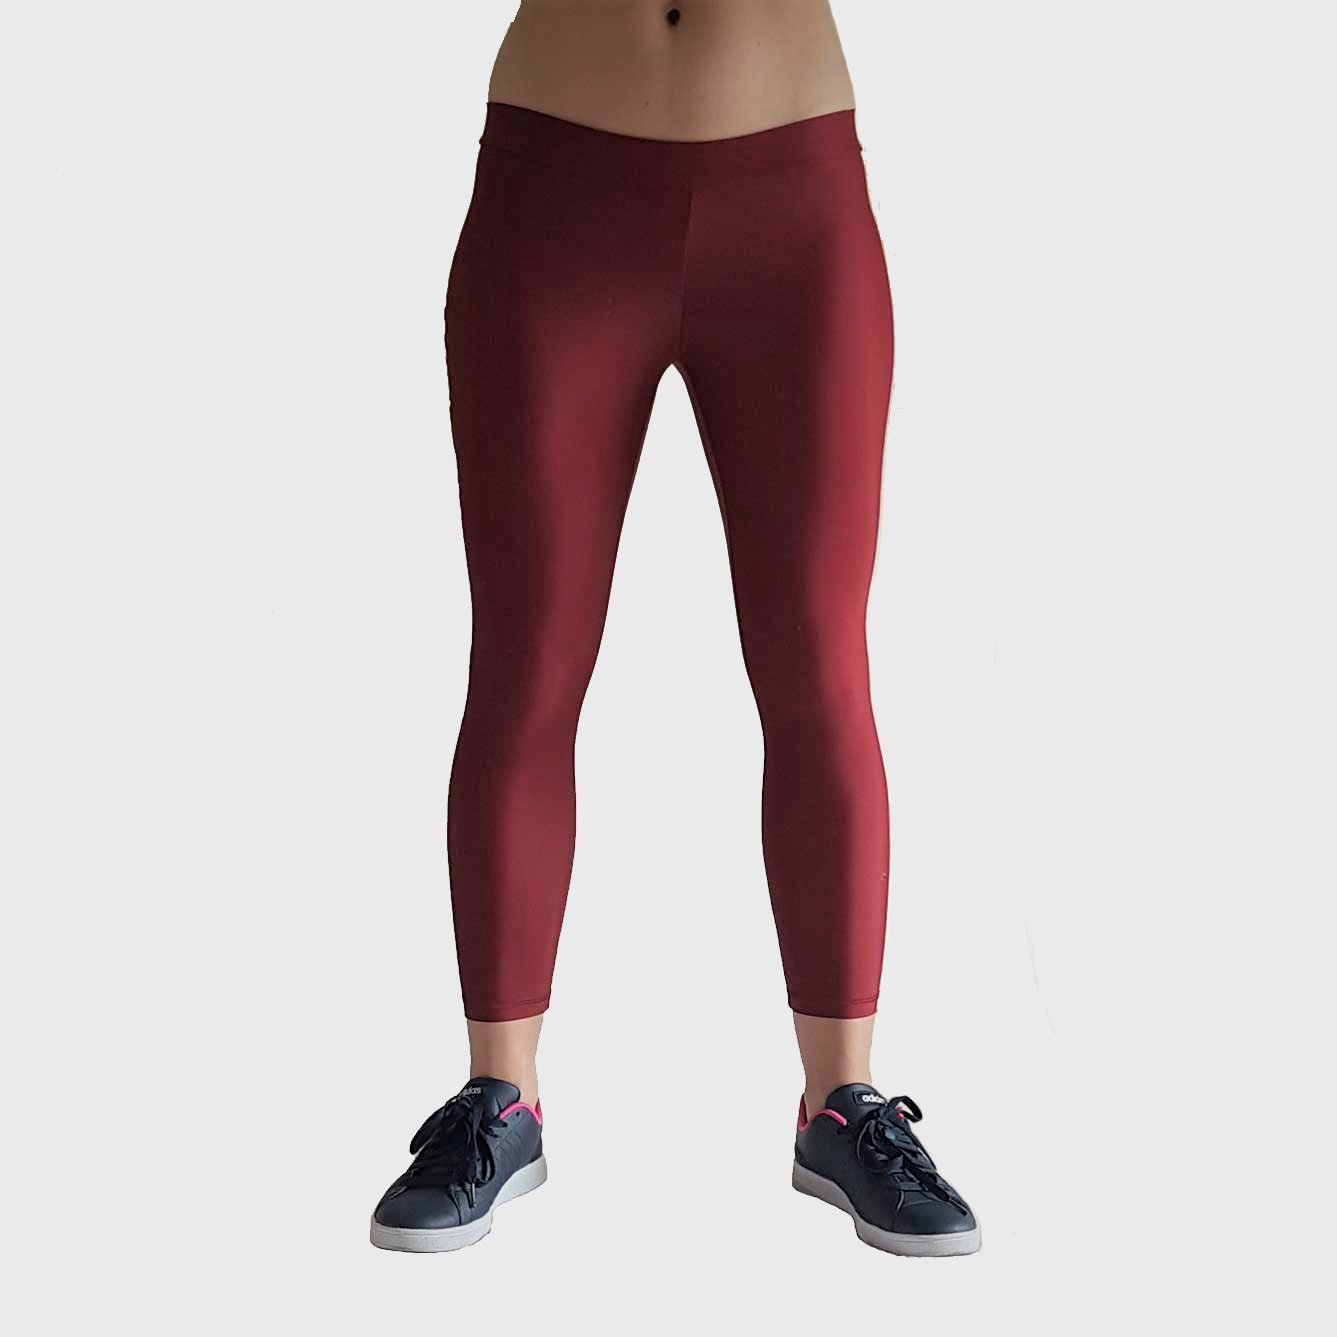 Female Maroon Tights/Leggings with two curve pocket body fit | Maroon Tights  with Curve Pockets